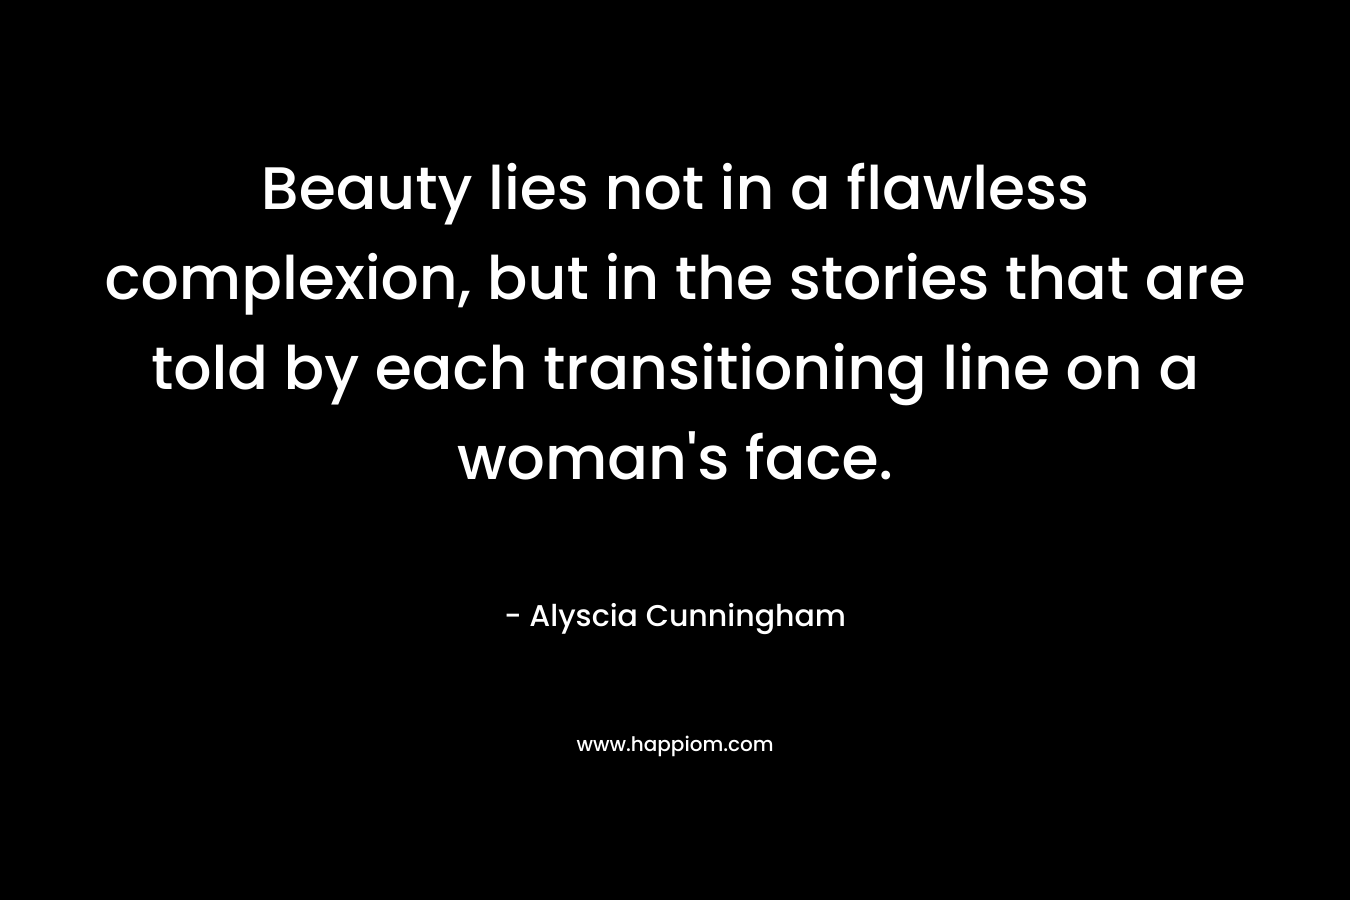 Beauty lies not in a flawless complexion, but in the stories that are told by each transitioning line on a woman's face.